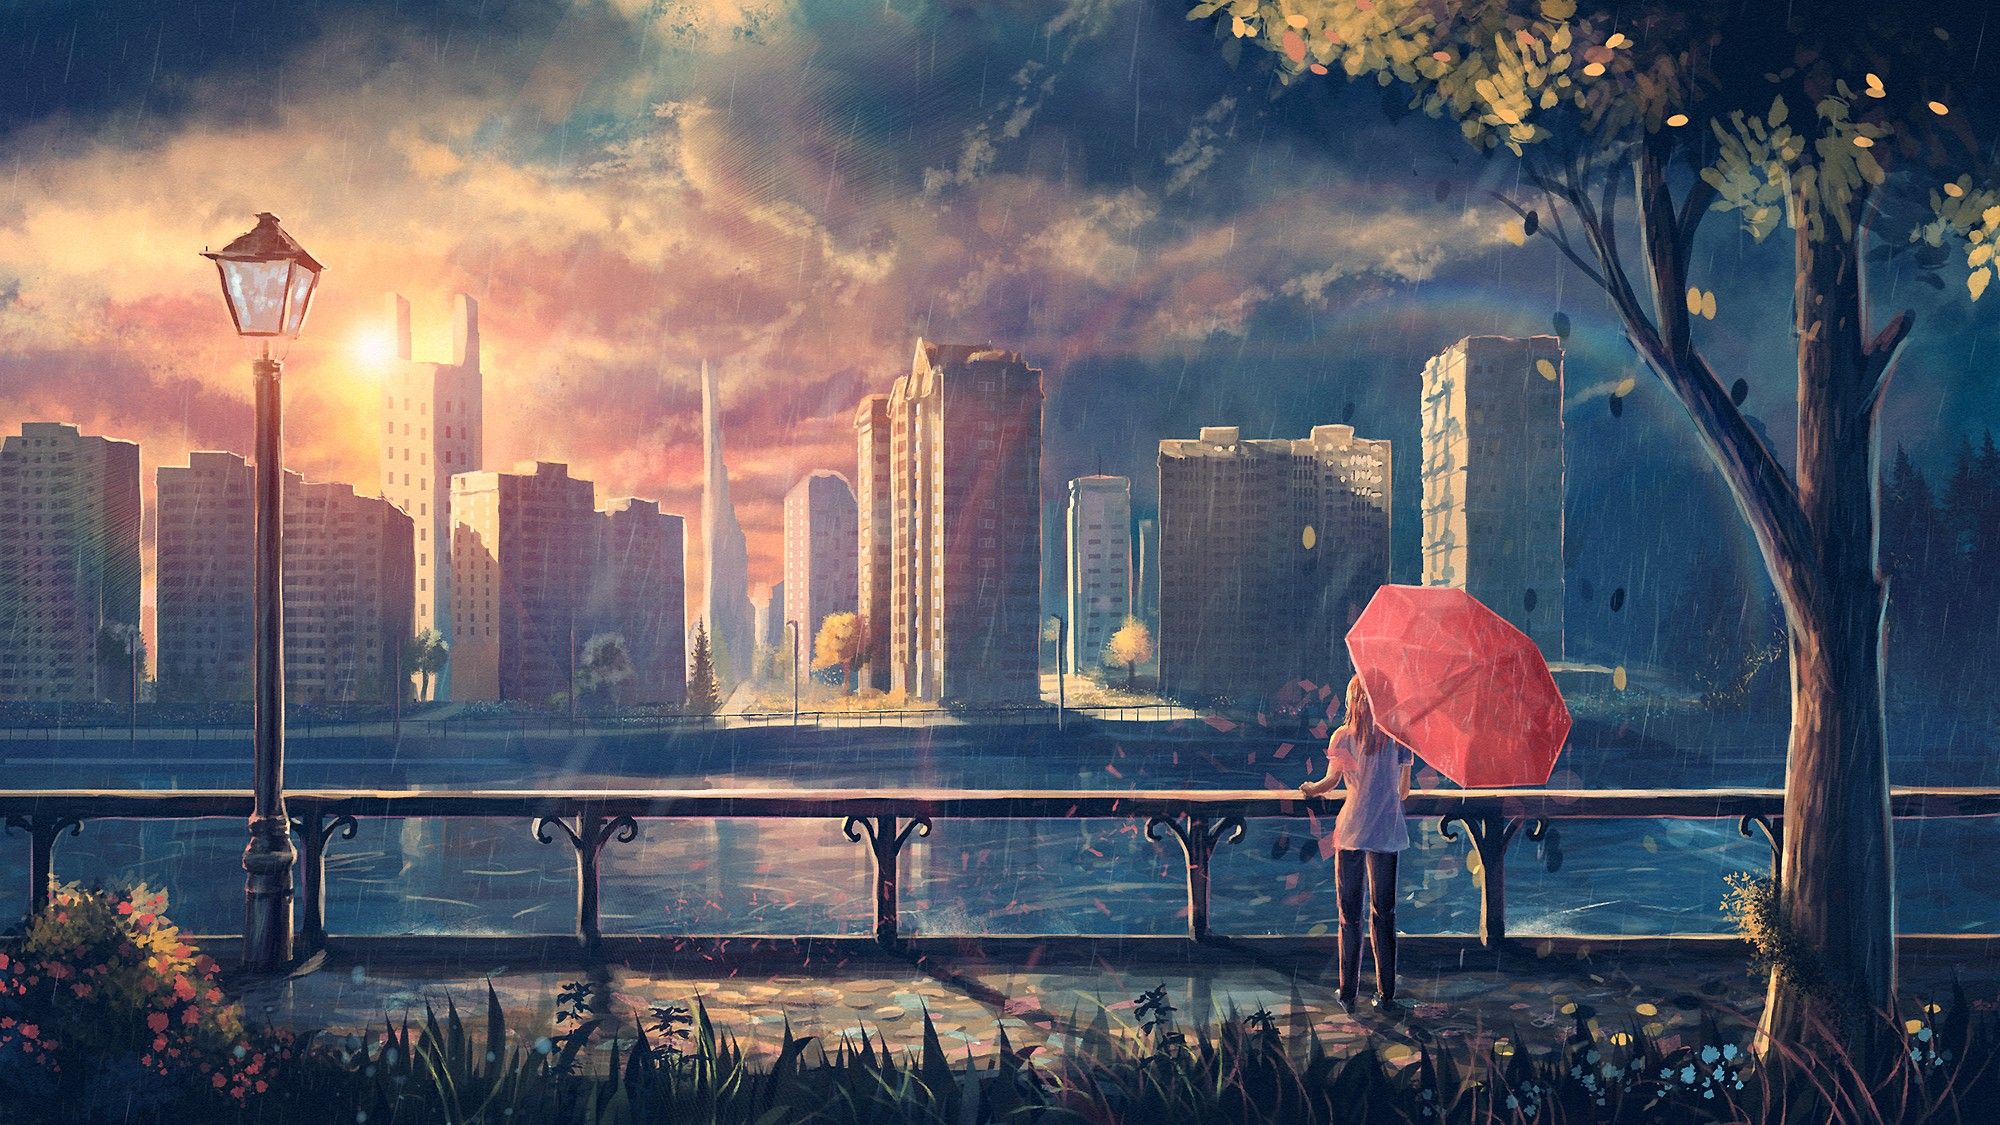 Rainy Day Sad Girl In The Water  Free Live Wallpaper  Live Desktop  Wallpapers